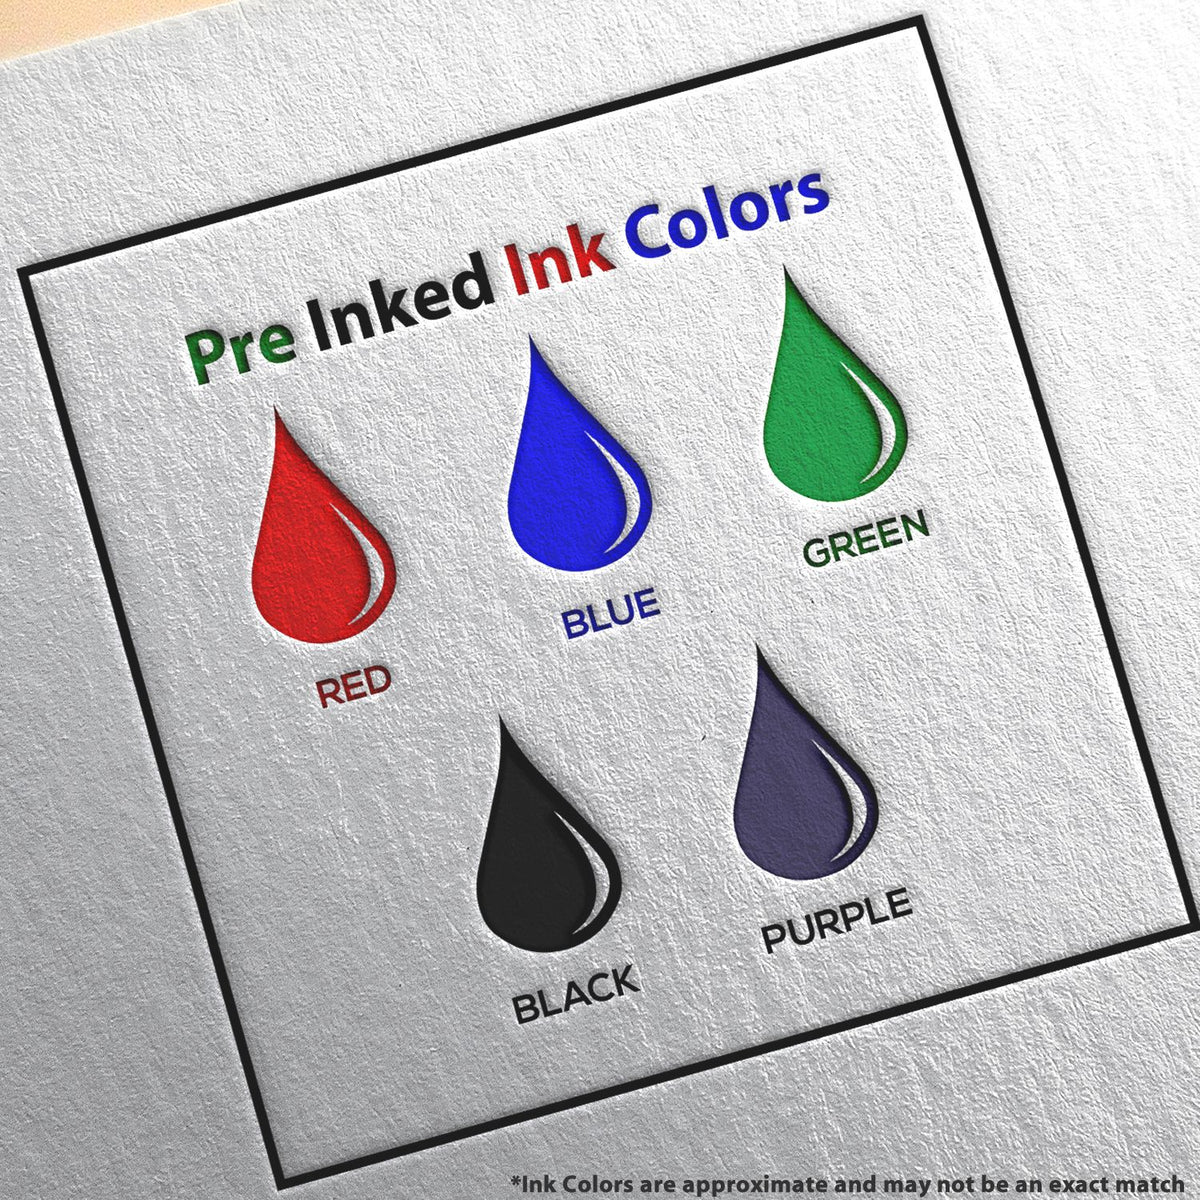 A picture showing the different ink colors or hues available for the Slim Pre-Inked Wyoming Professional Engineer Seal Stamp product.